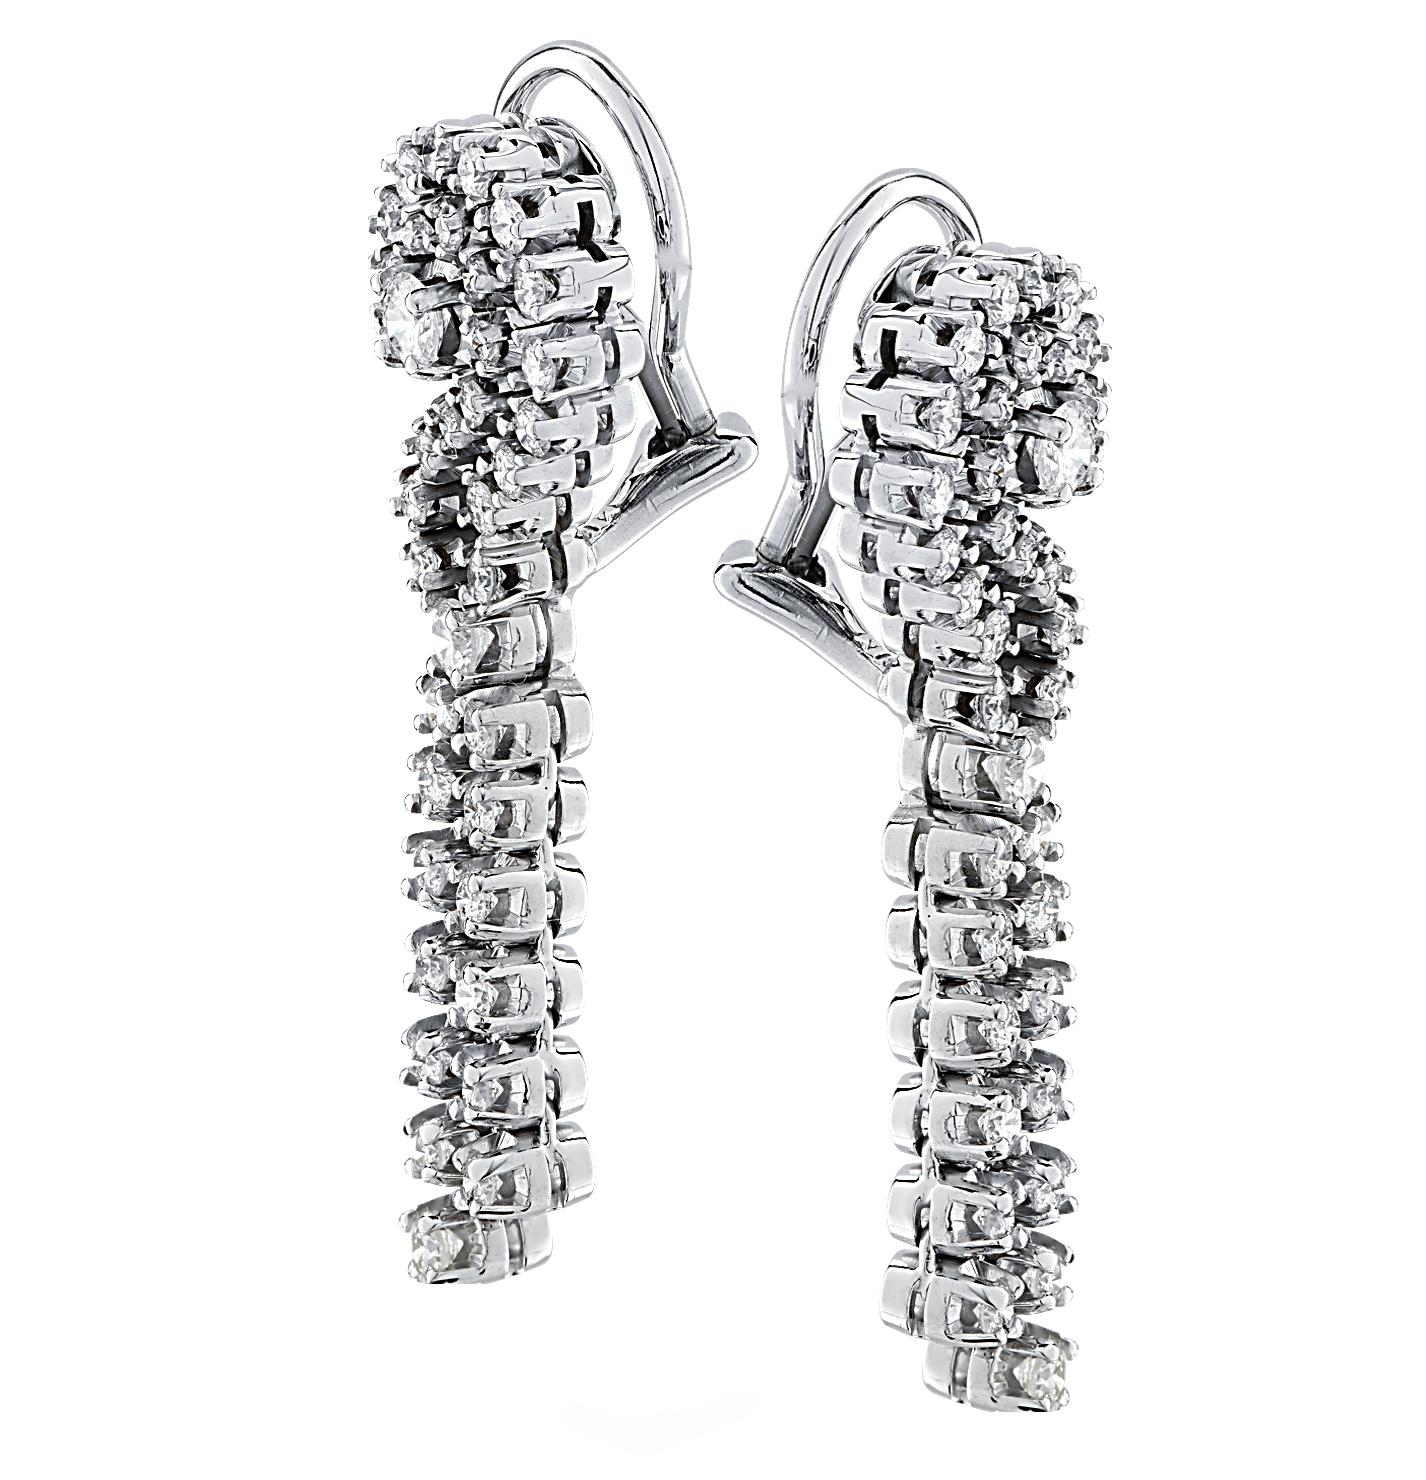 Dazzling diamond dangle clip-on earrings crafted in white gold, featuring 76 round brilliant cut diamonds weighing approximately 3 carats total, G color, VS-SI clarity. These stunning earrings measure 1.6 inches in length, .5 inches in width and